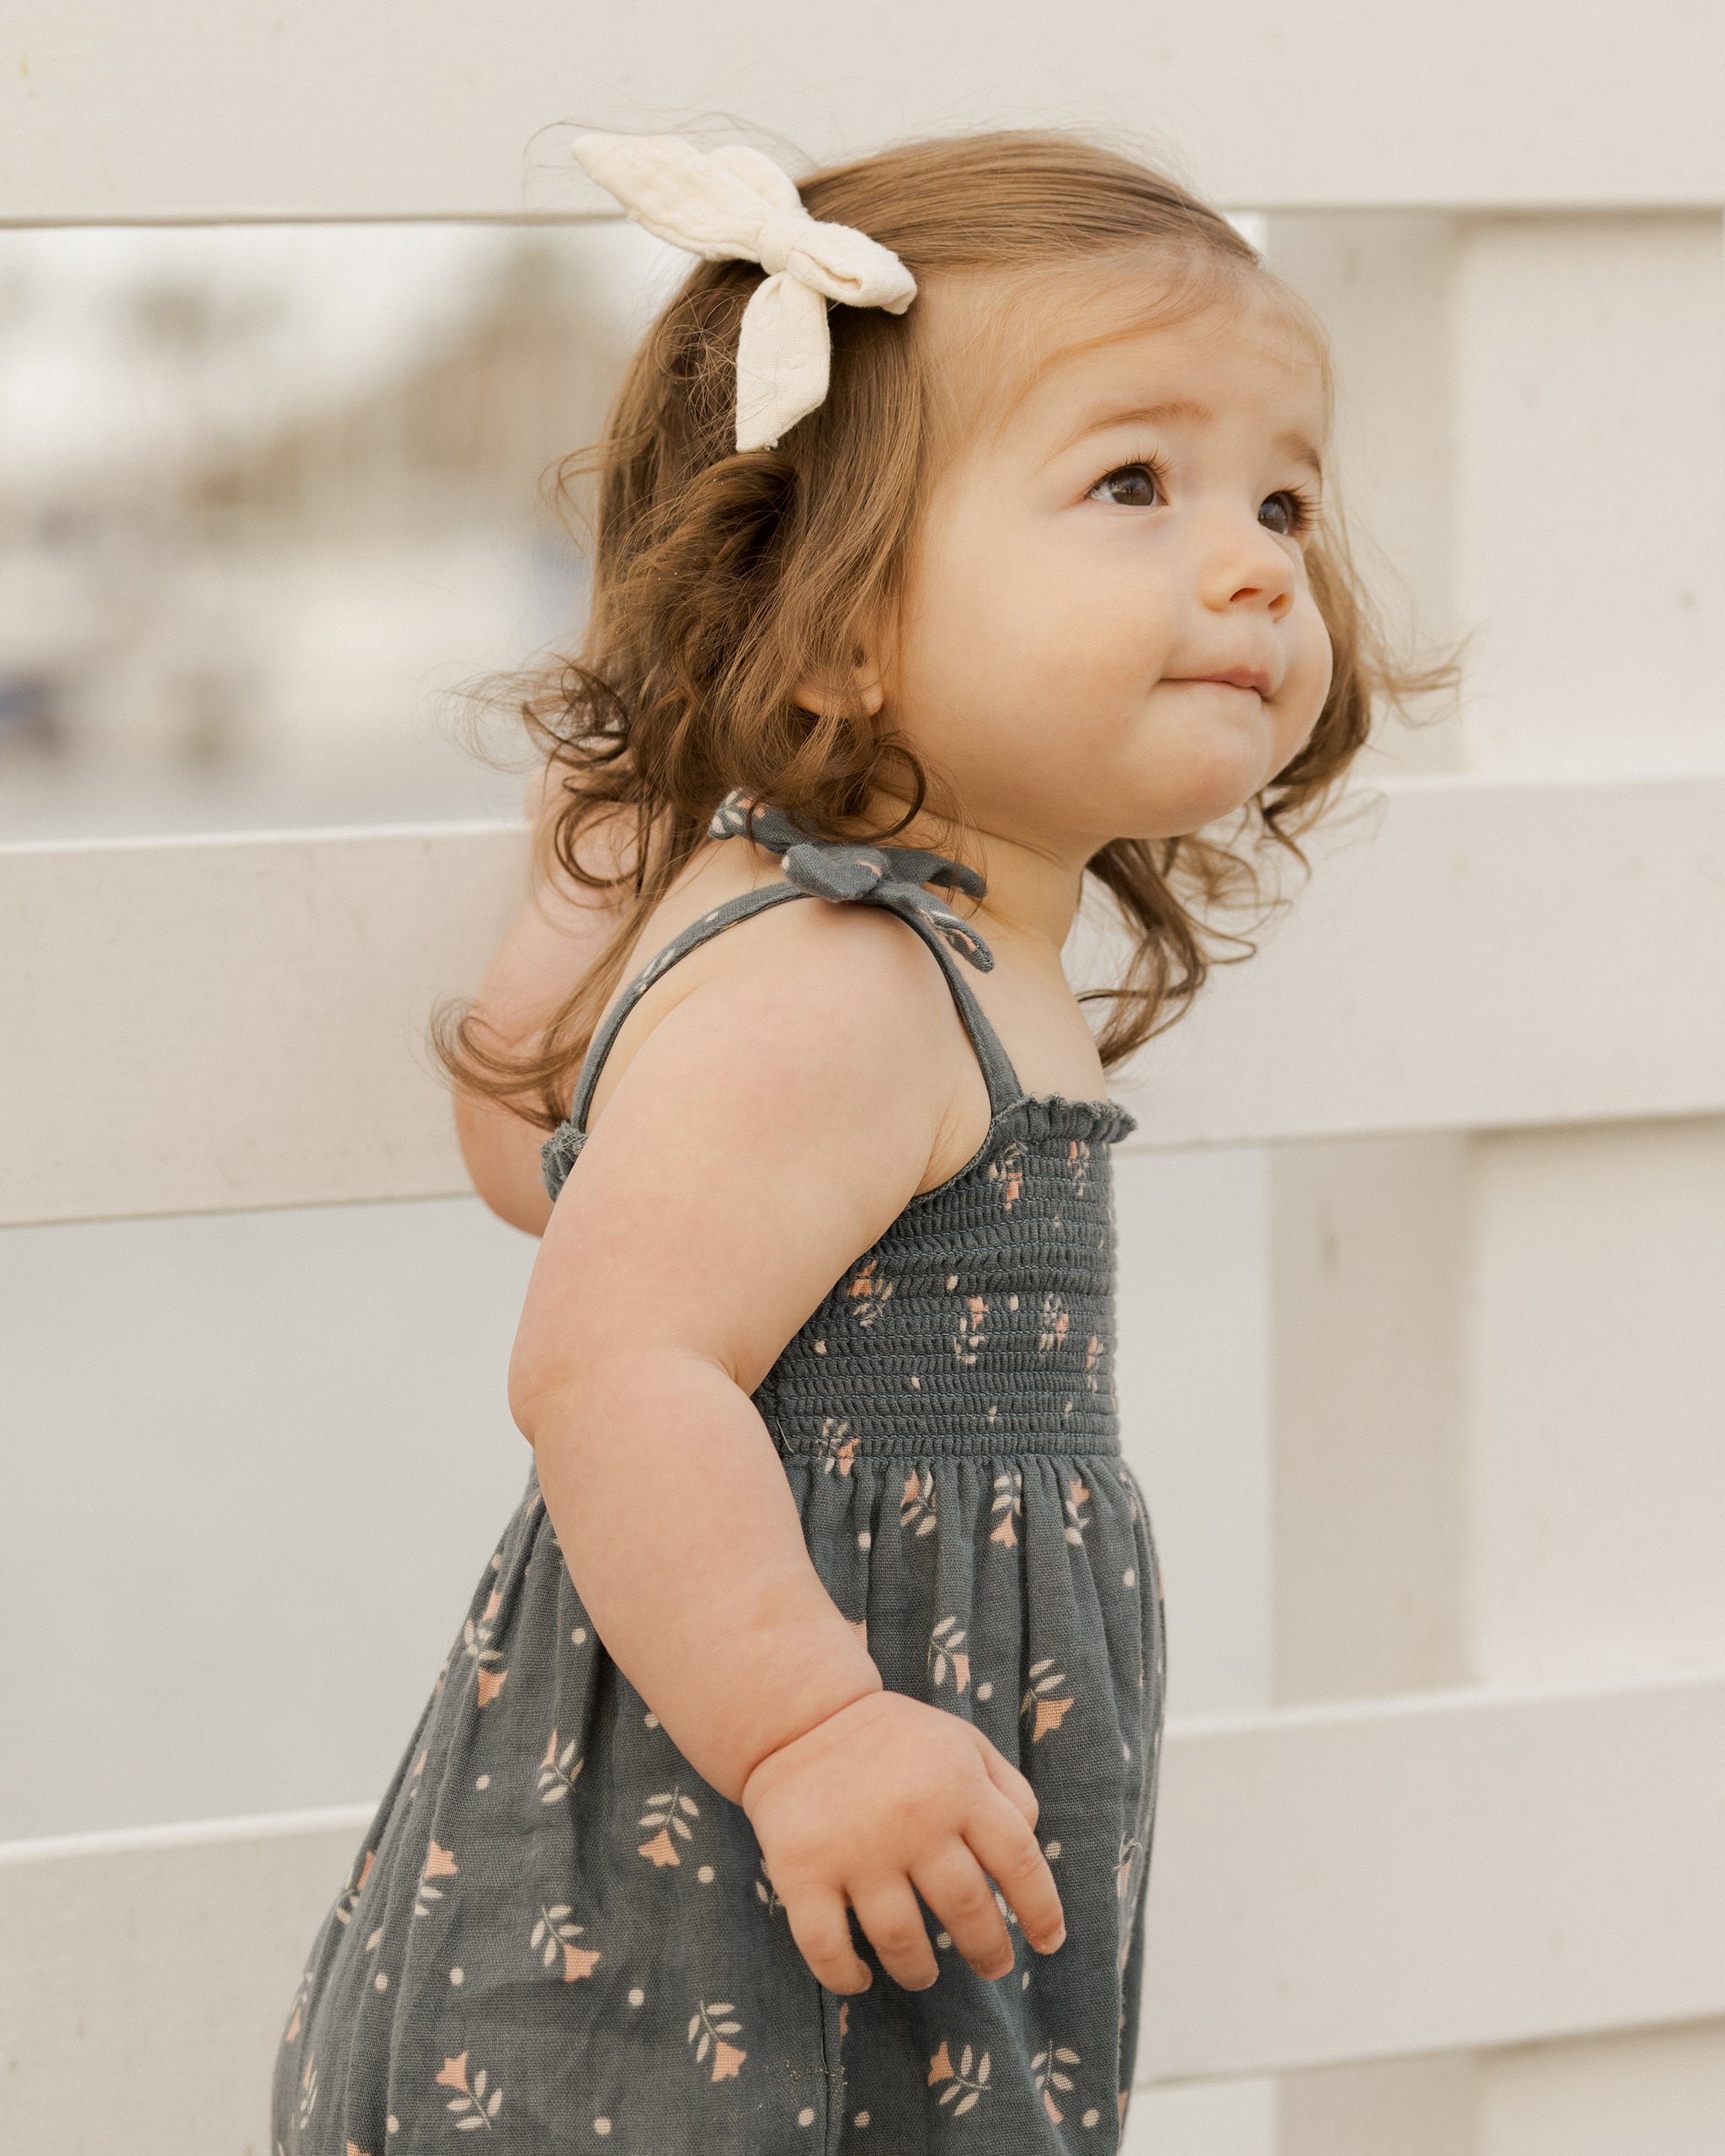 Sawyer Jumpsuit || Morning Glory - Rylee + Cru | Kids Clothes | Trendy Baby Clothes | Modern Infant Outfits |